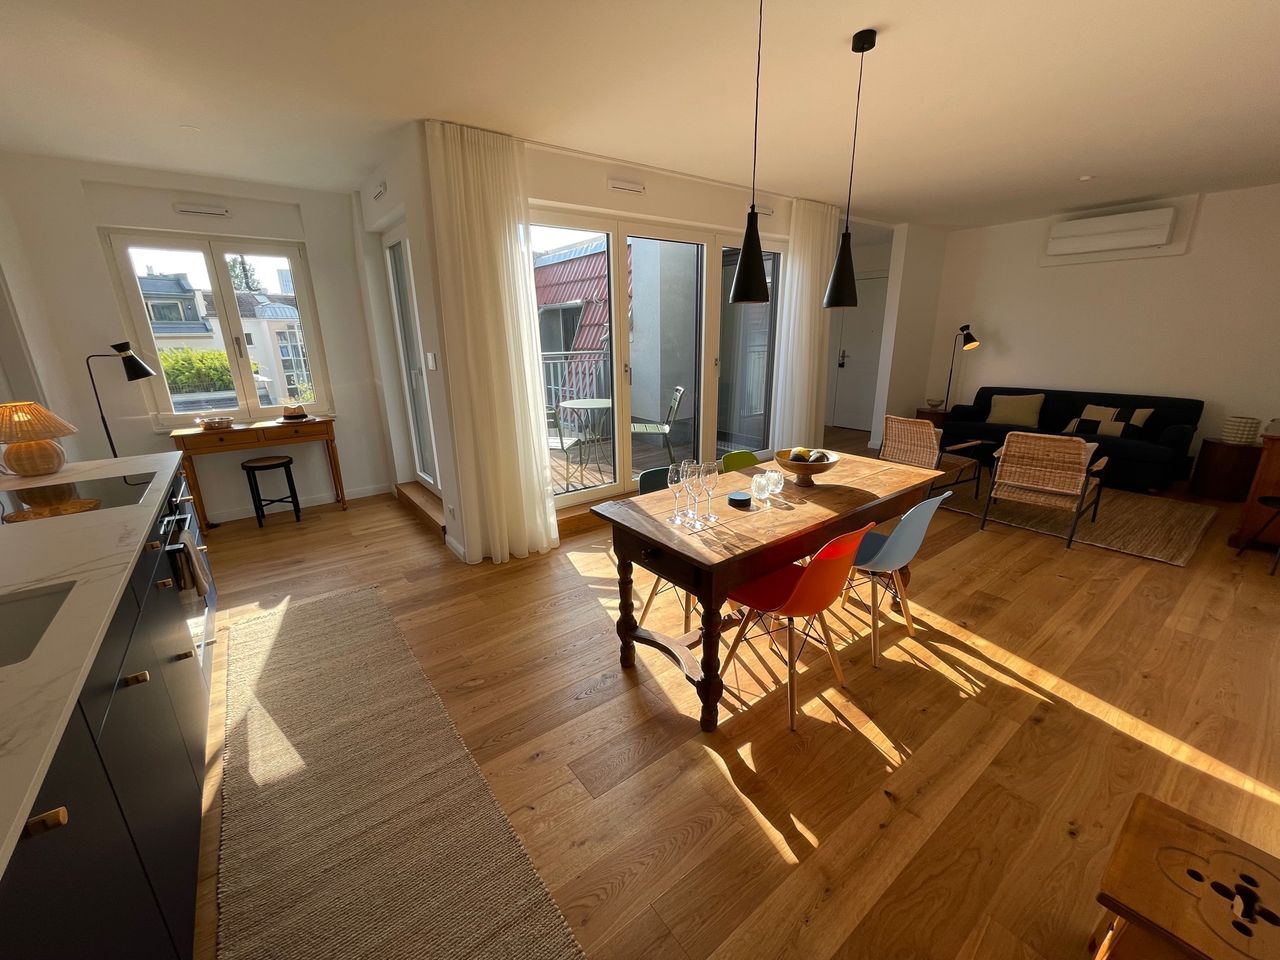 Soho style new & wonderful 2 room roof top flat with AC and terrace in Berlin-Mitte